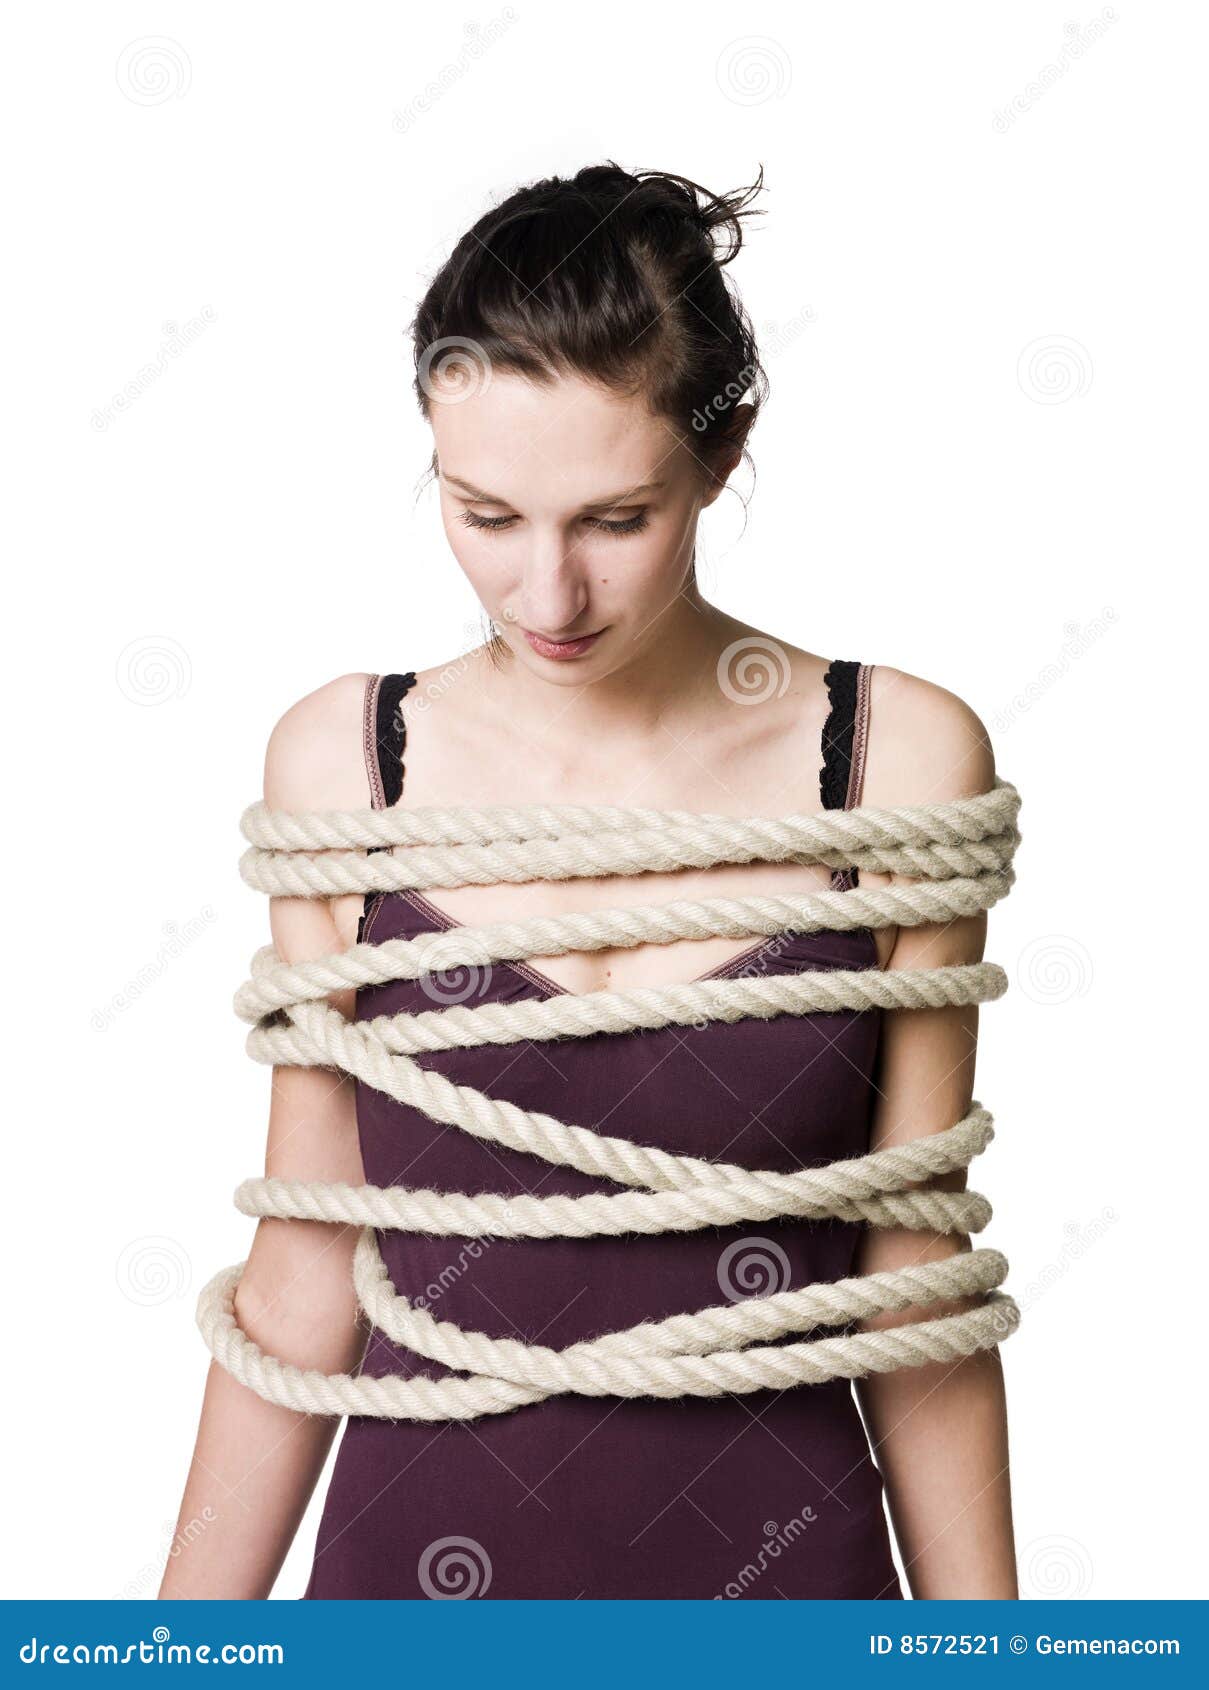 tied-up-woman-stock-image-image-of-background-toil-woman-8572521